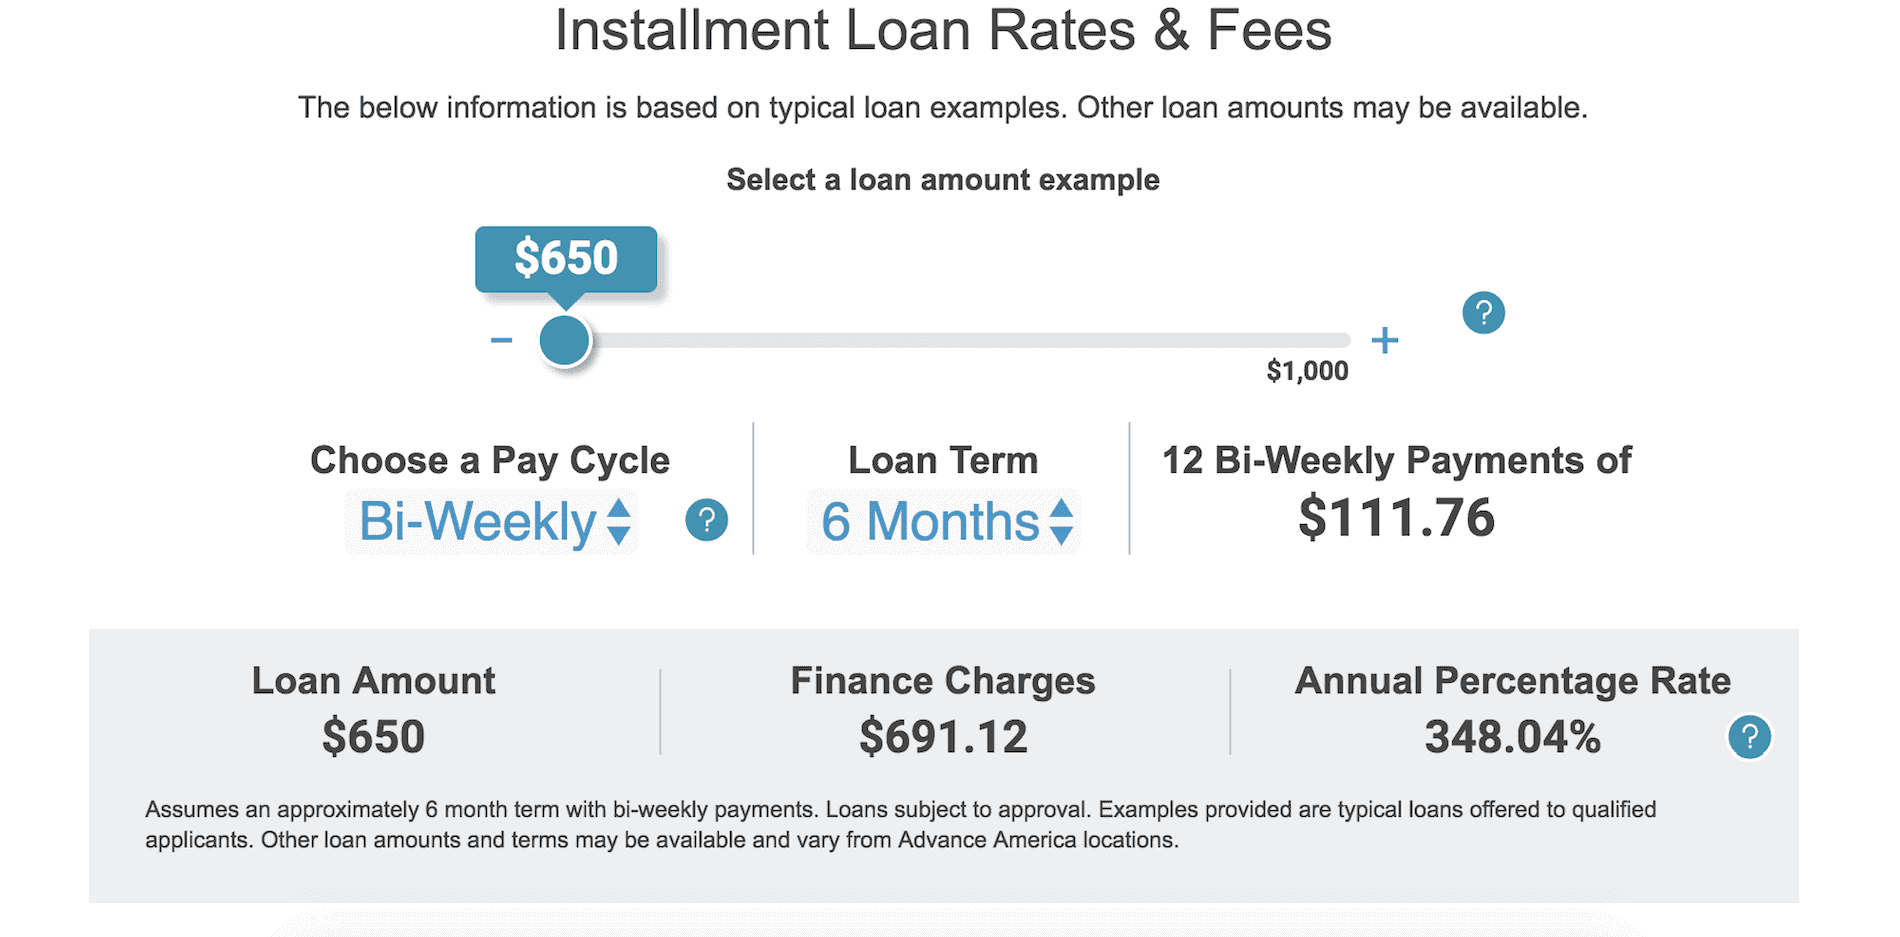 SpeedyCash installment loan options, details pay cycle, loan term and repayment amounts